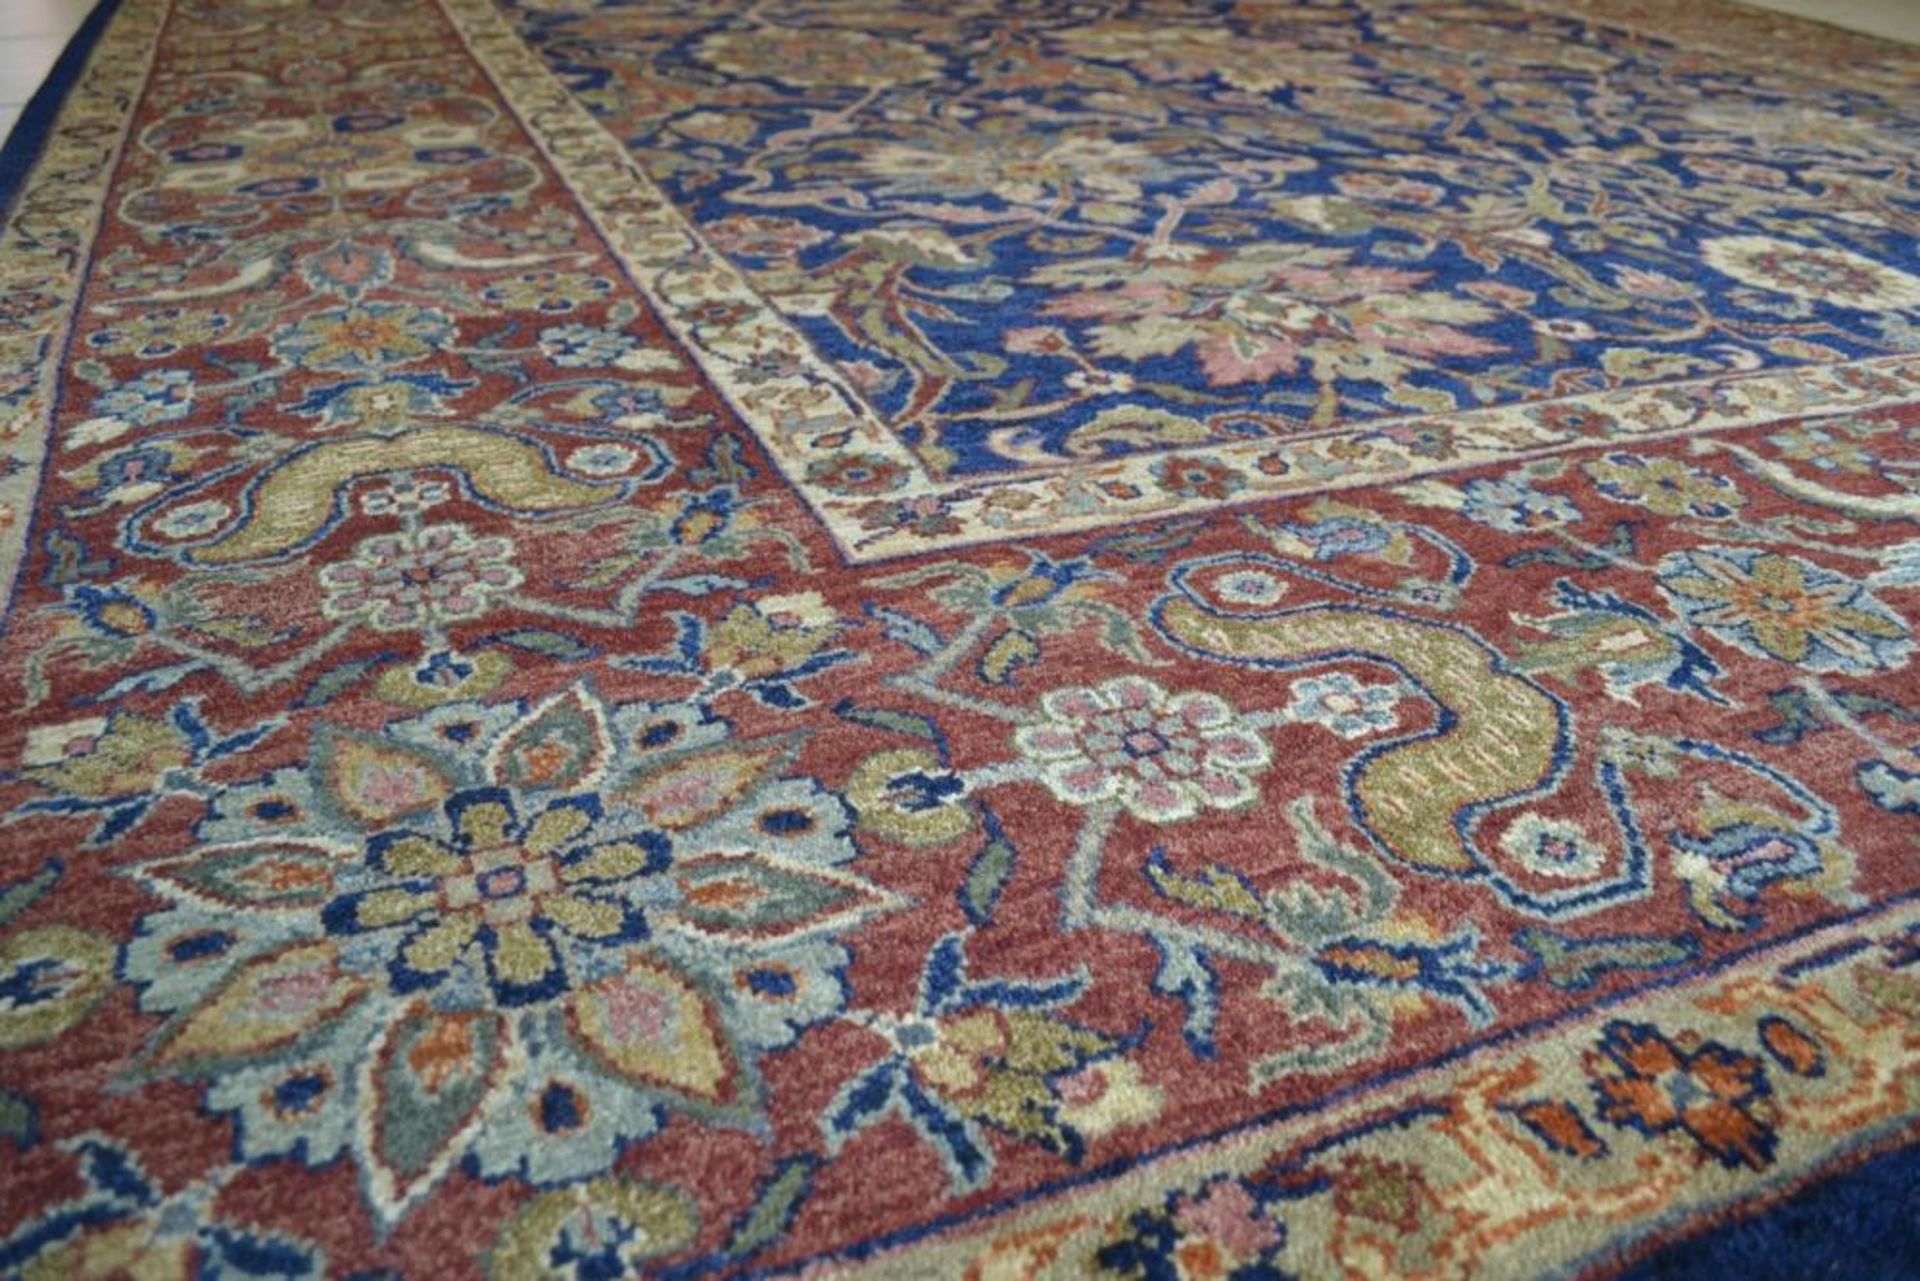 1 x Fine Indian Vegetable Dyed Handmade Carpet in Navy and Rust - All Wool With Cotton Foundation - - Image 5 of 22